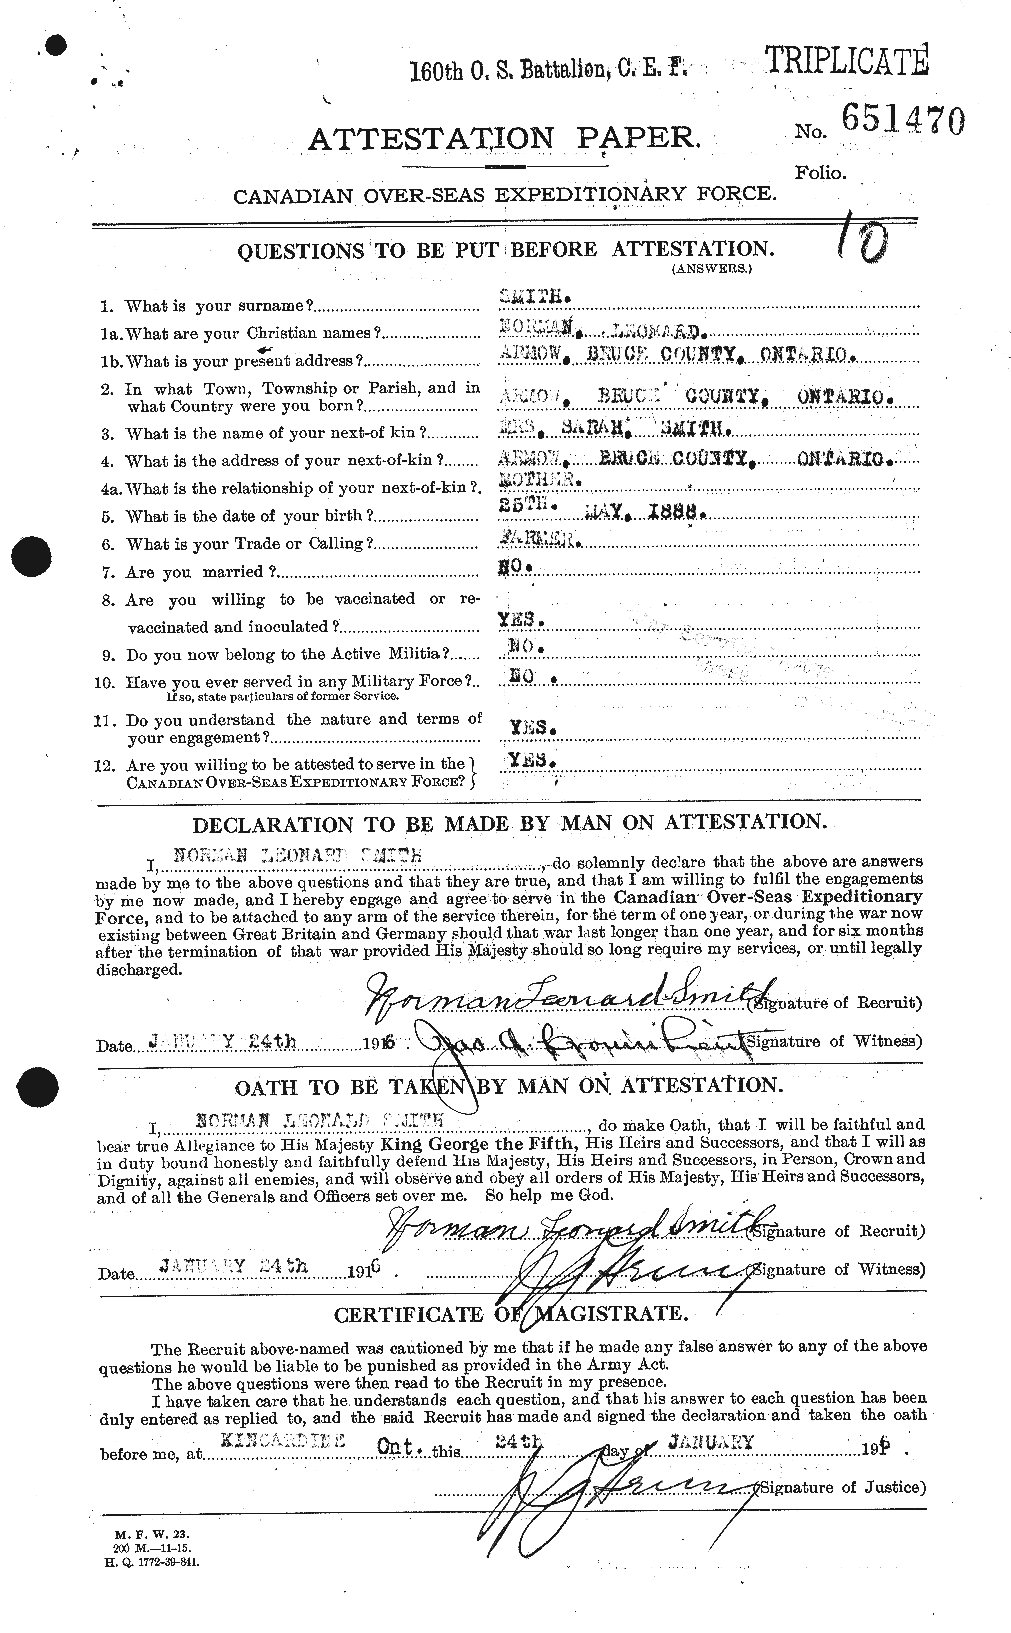 Personnel Records of the First World War - CEF 103853a